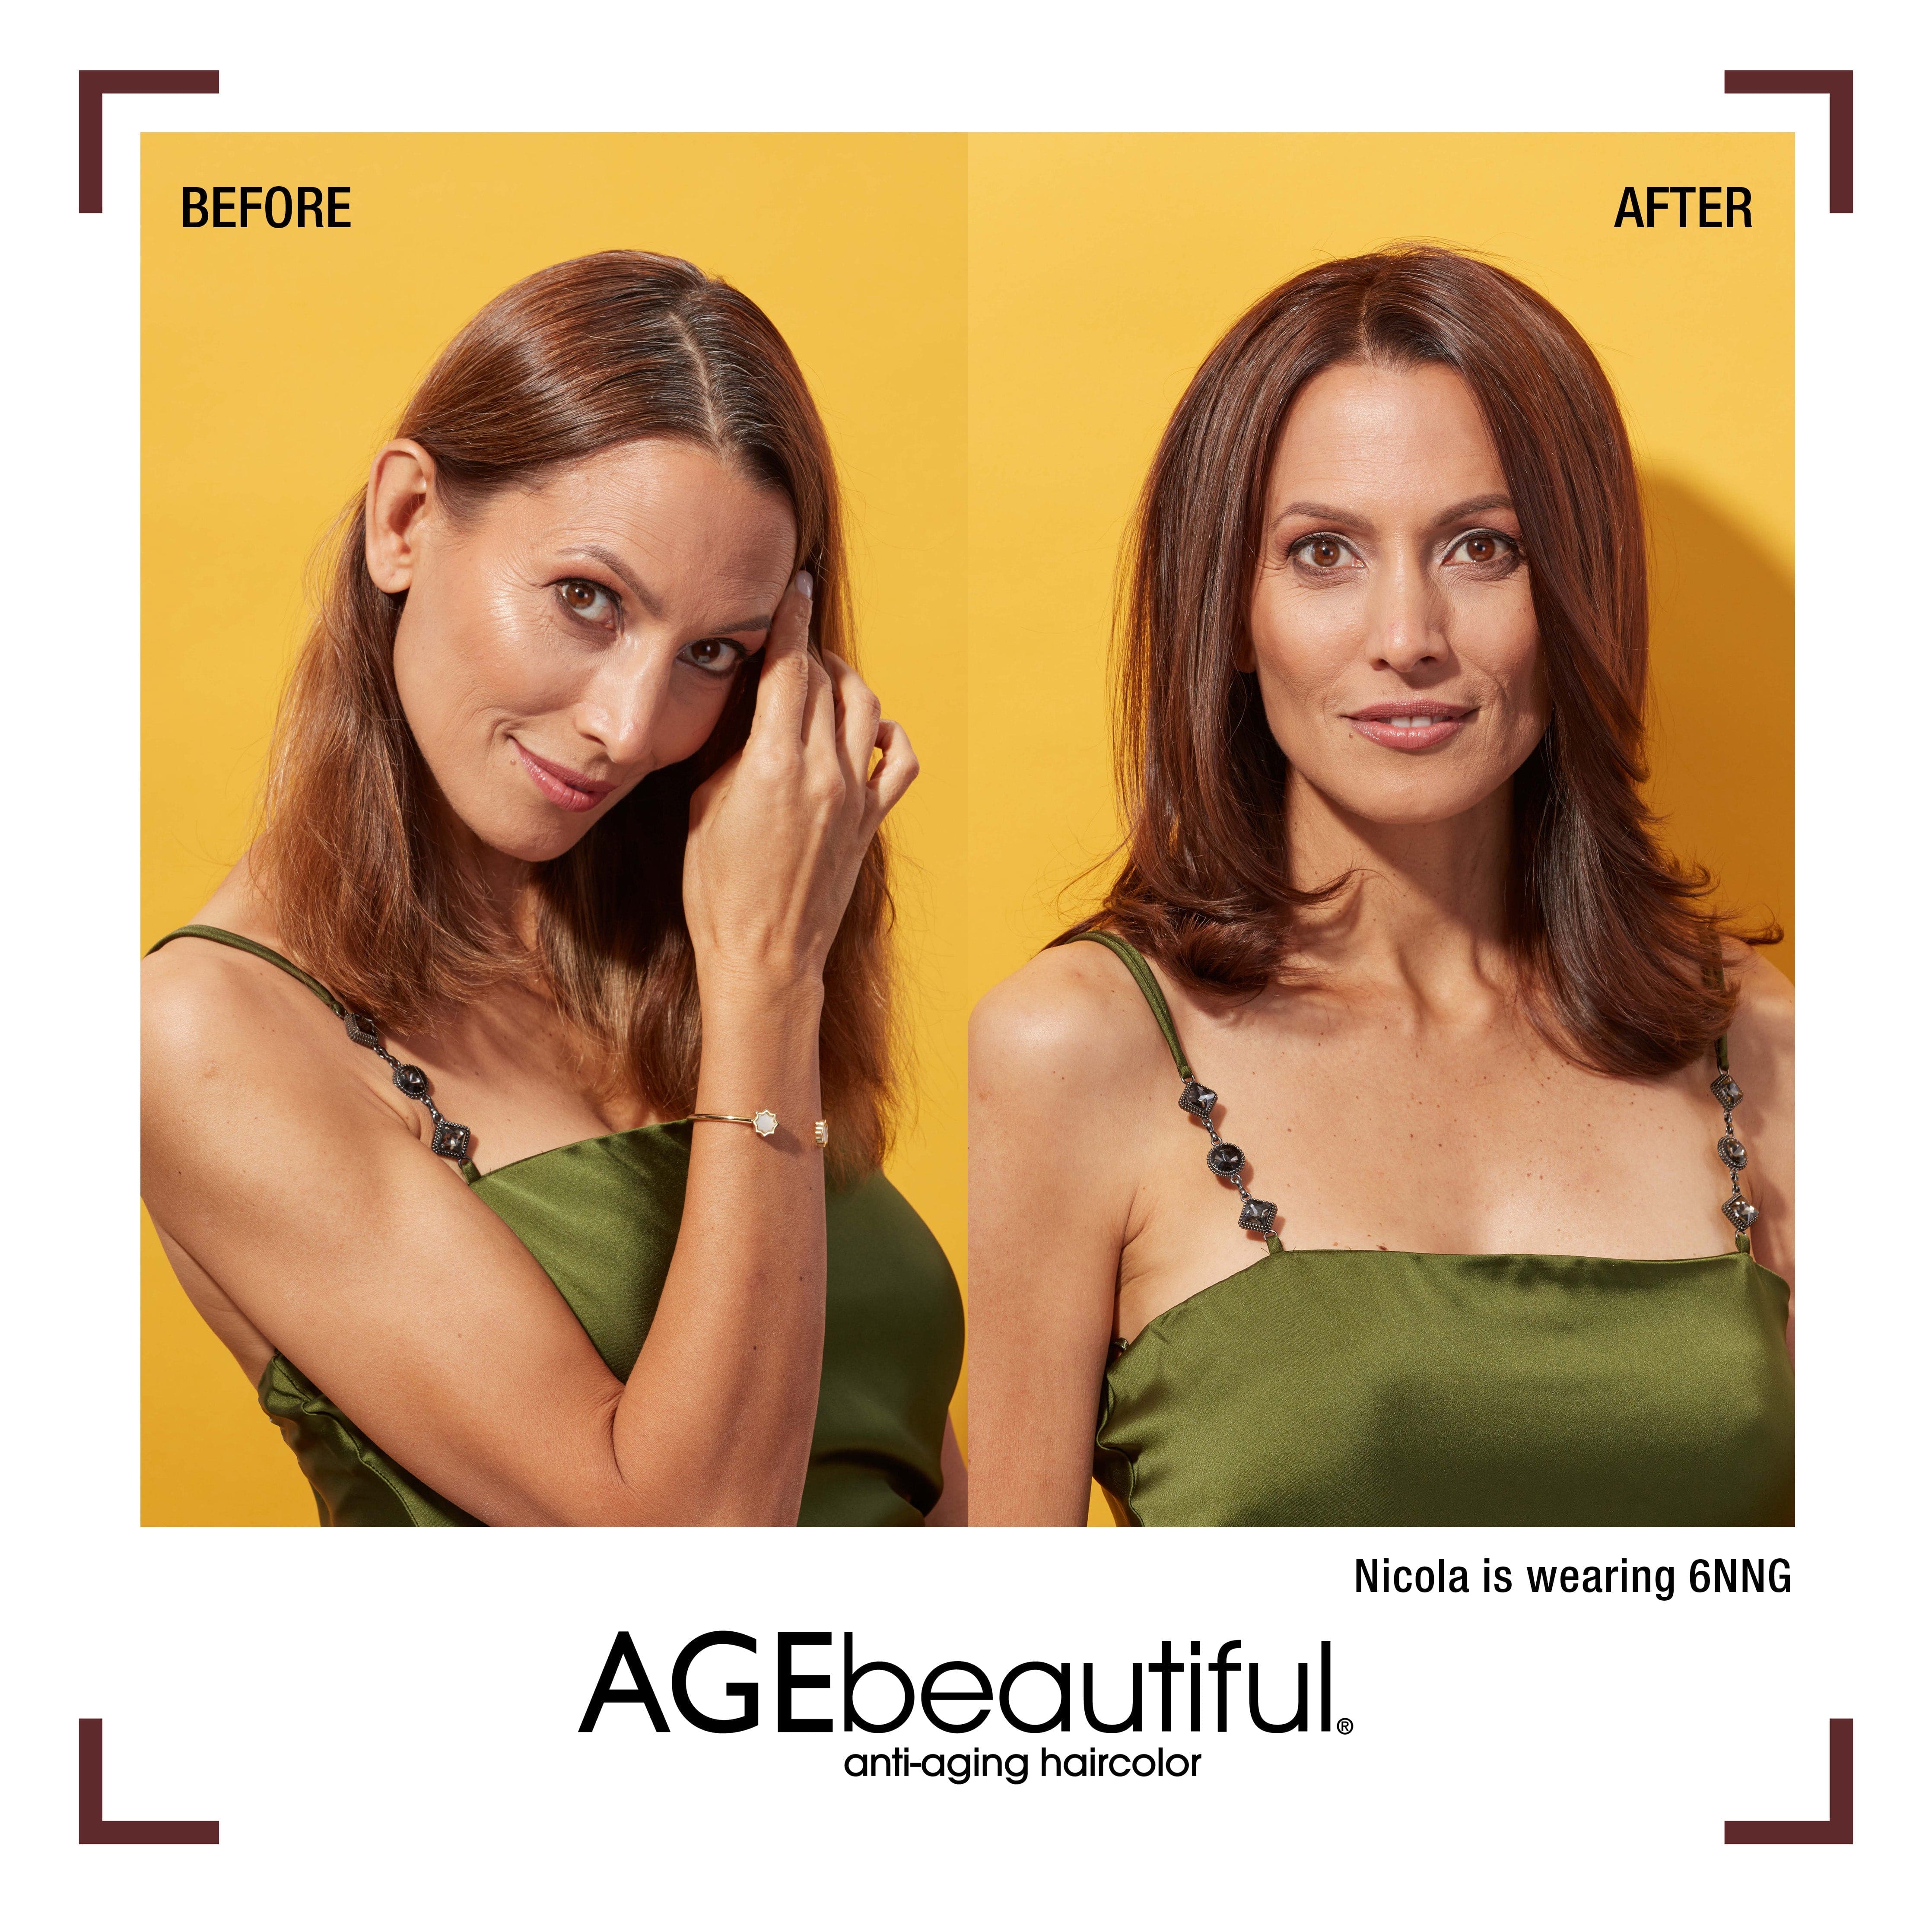 AGEbeautiful liqui-creme hair color model before and after model wearing 6NNG.